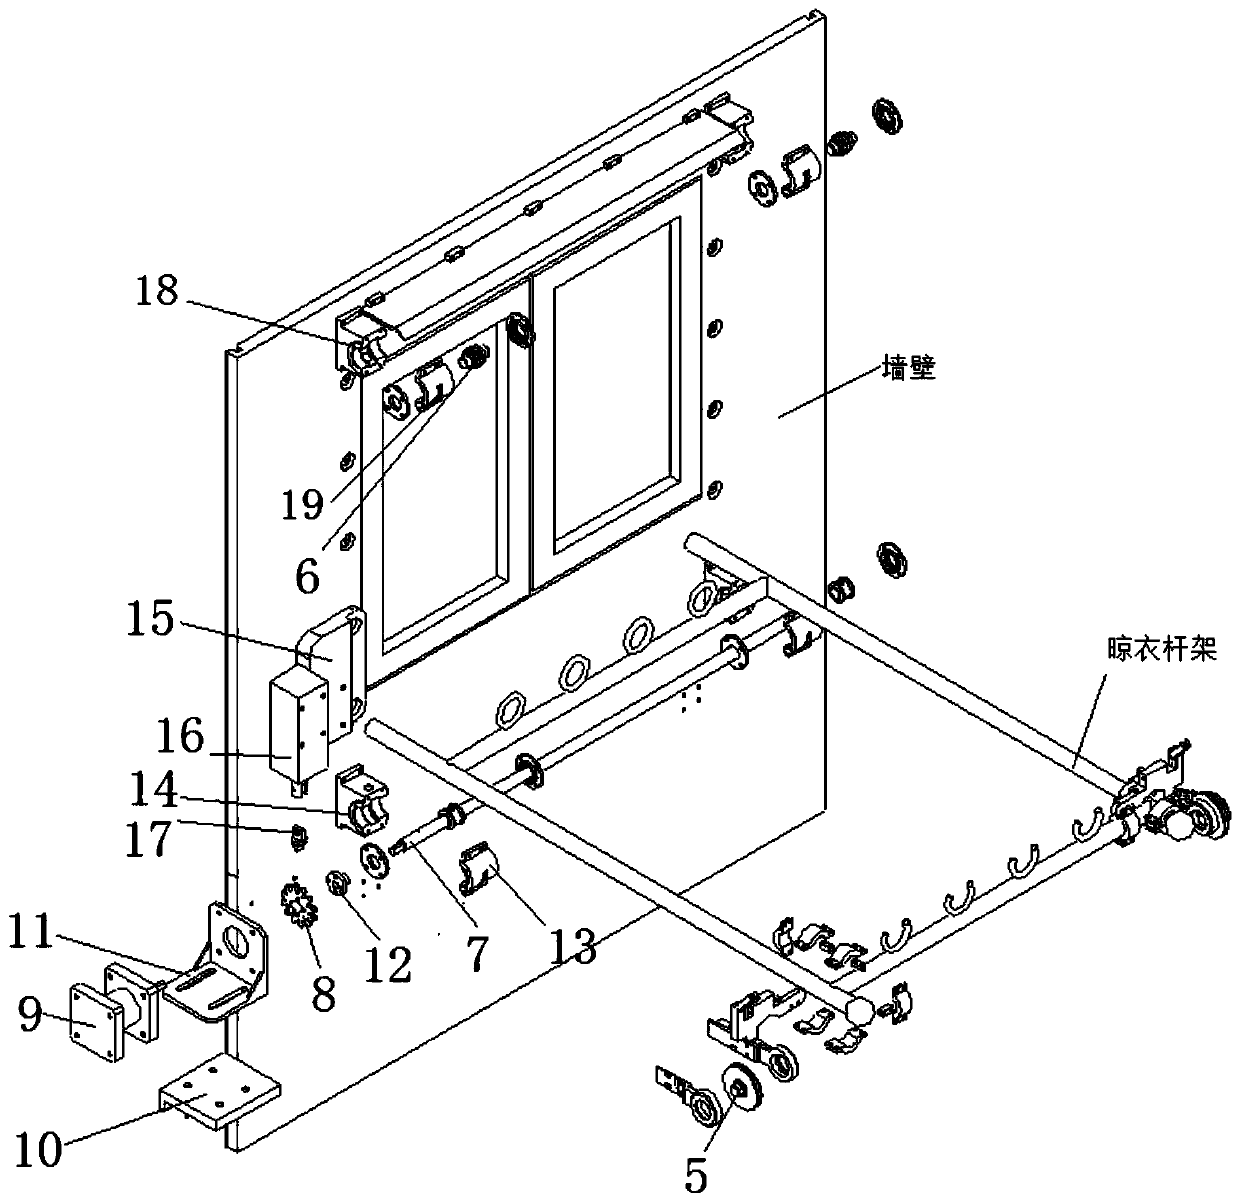 Networked automatic rain shielding device for clothes airing rod frame